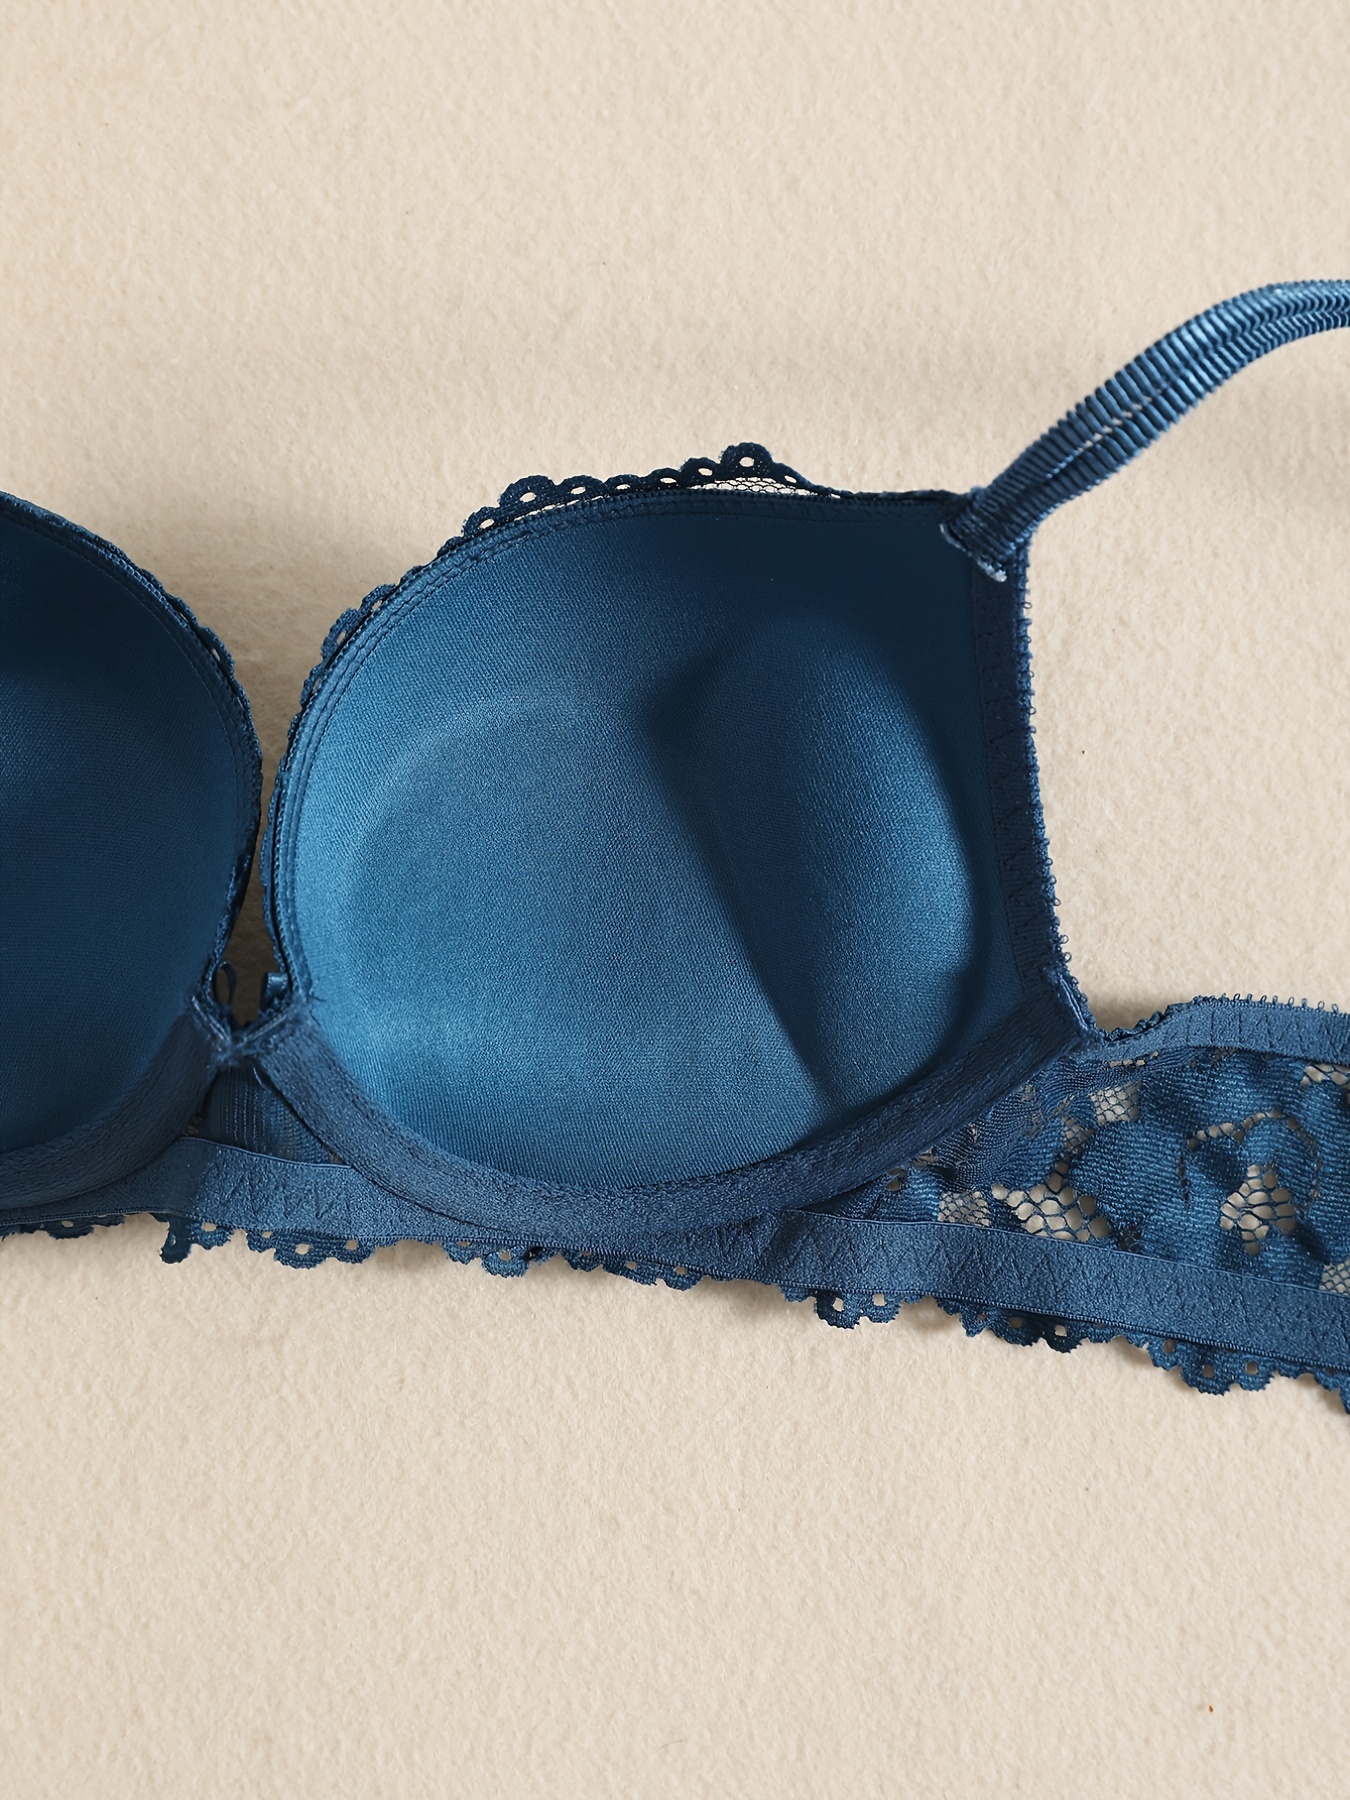 Sewing a blue lace bra and panties < with my hands - Dream